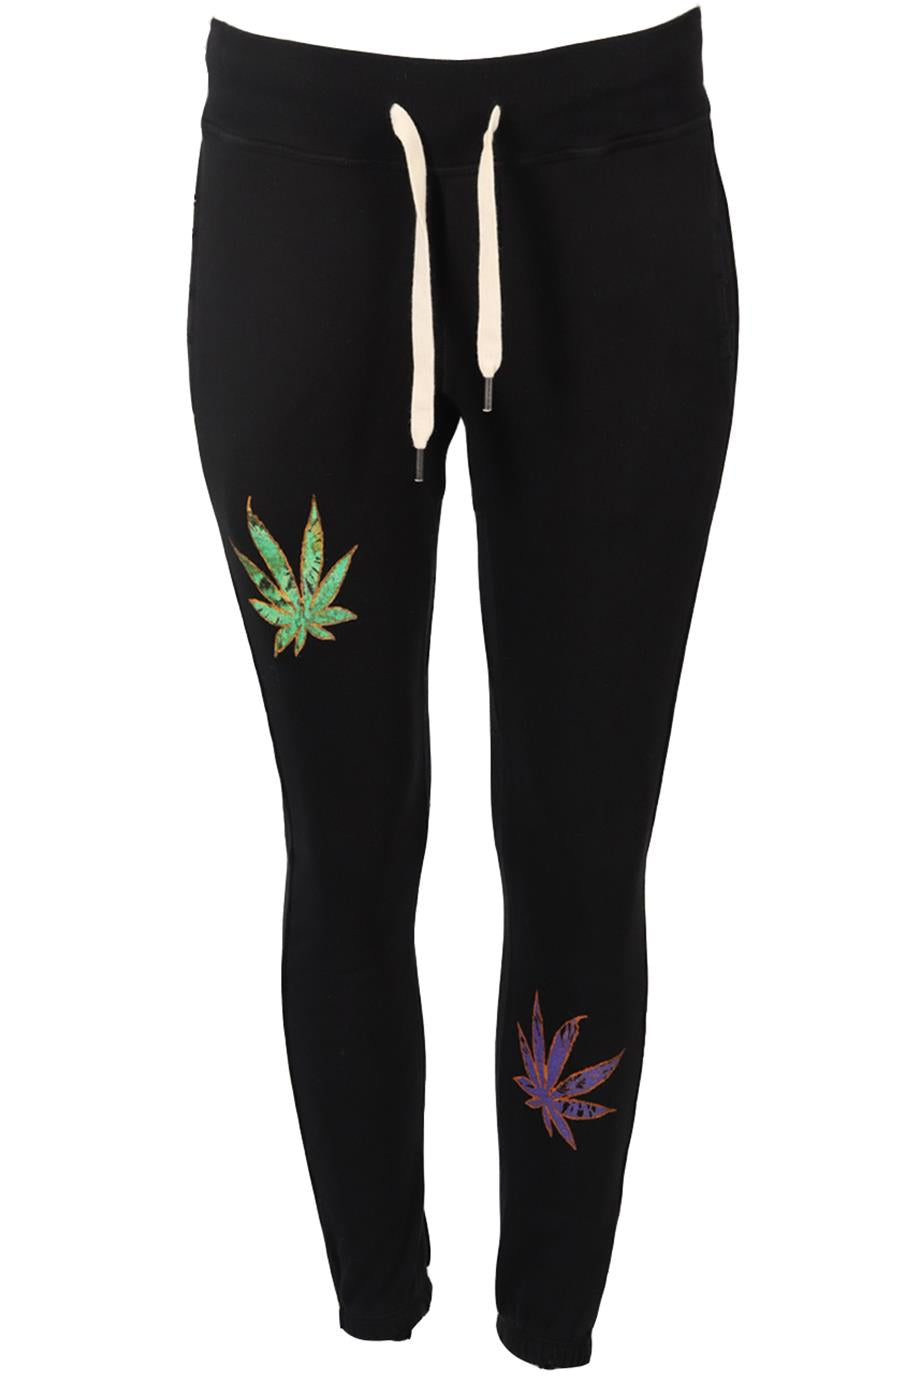 NSF + JACQUIE AICHE PRINTED COTTON TRACK PANTS XSMALL